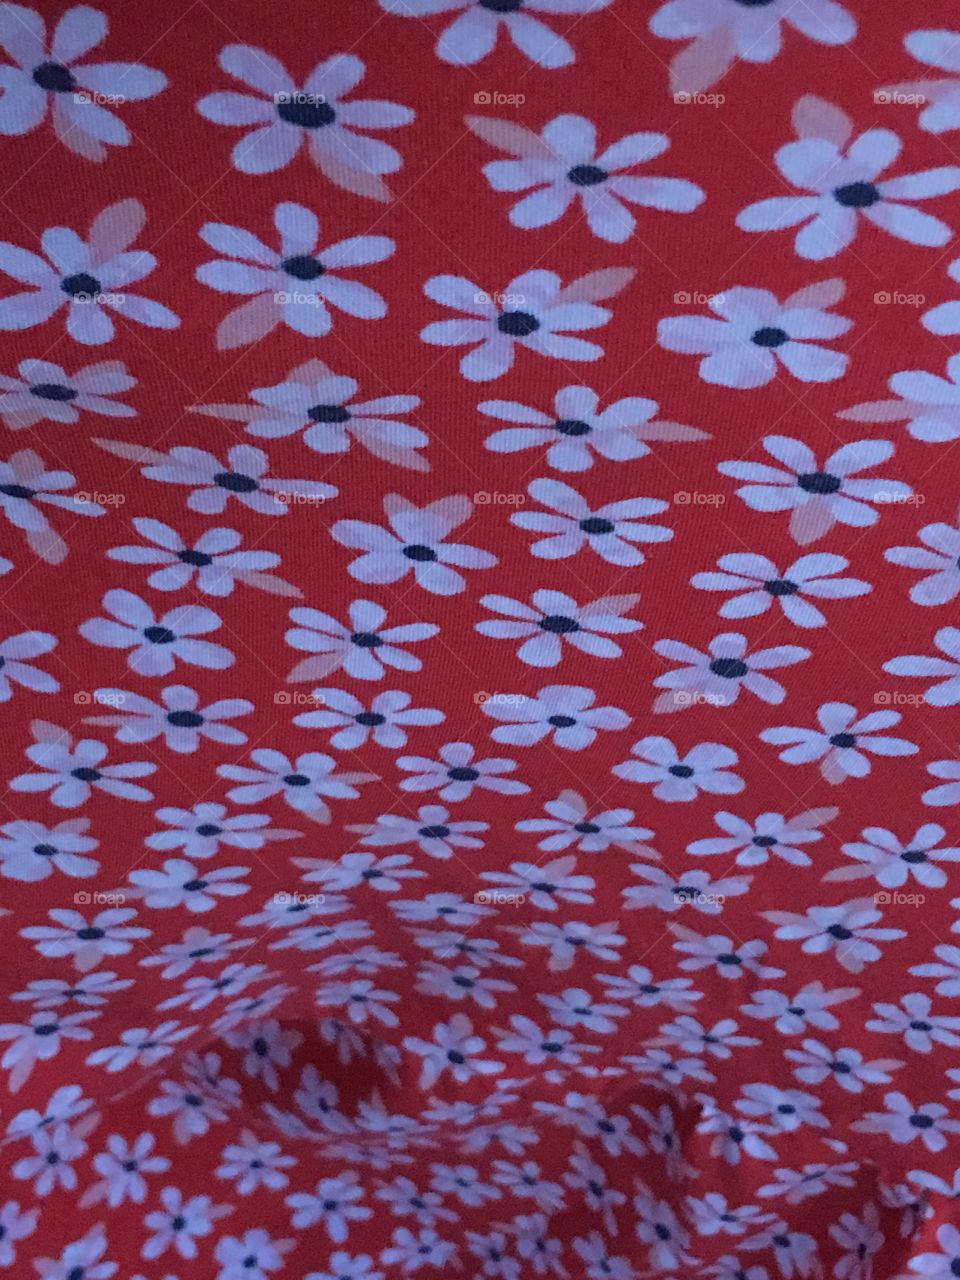 Red white and blue. Flowers. Floral print. Beautiful american print. 